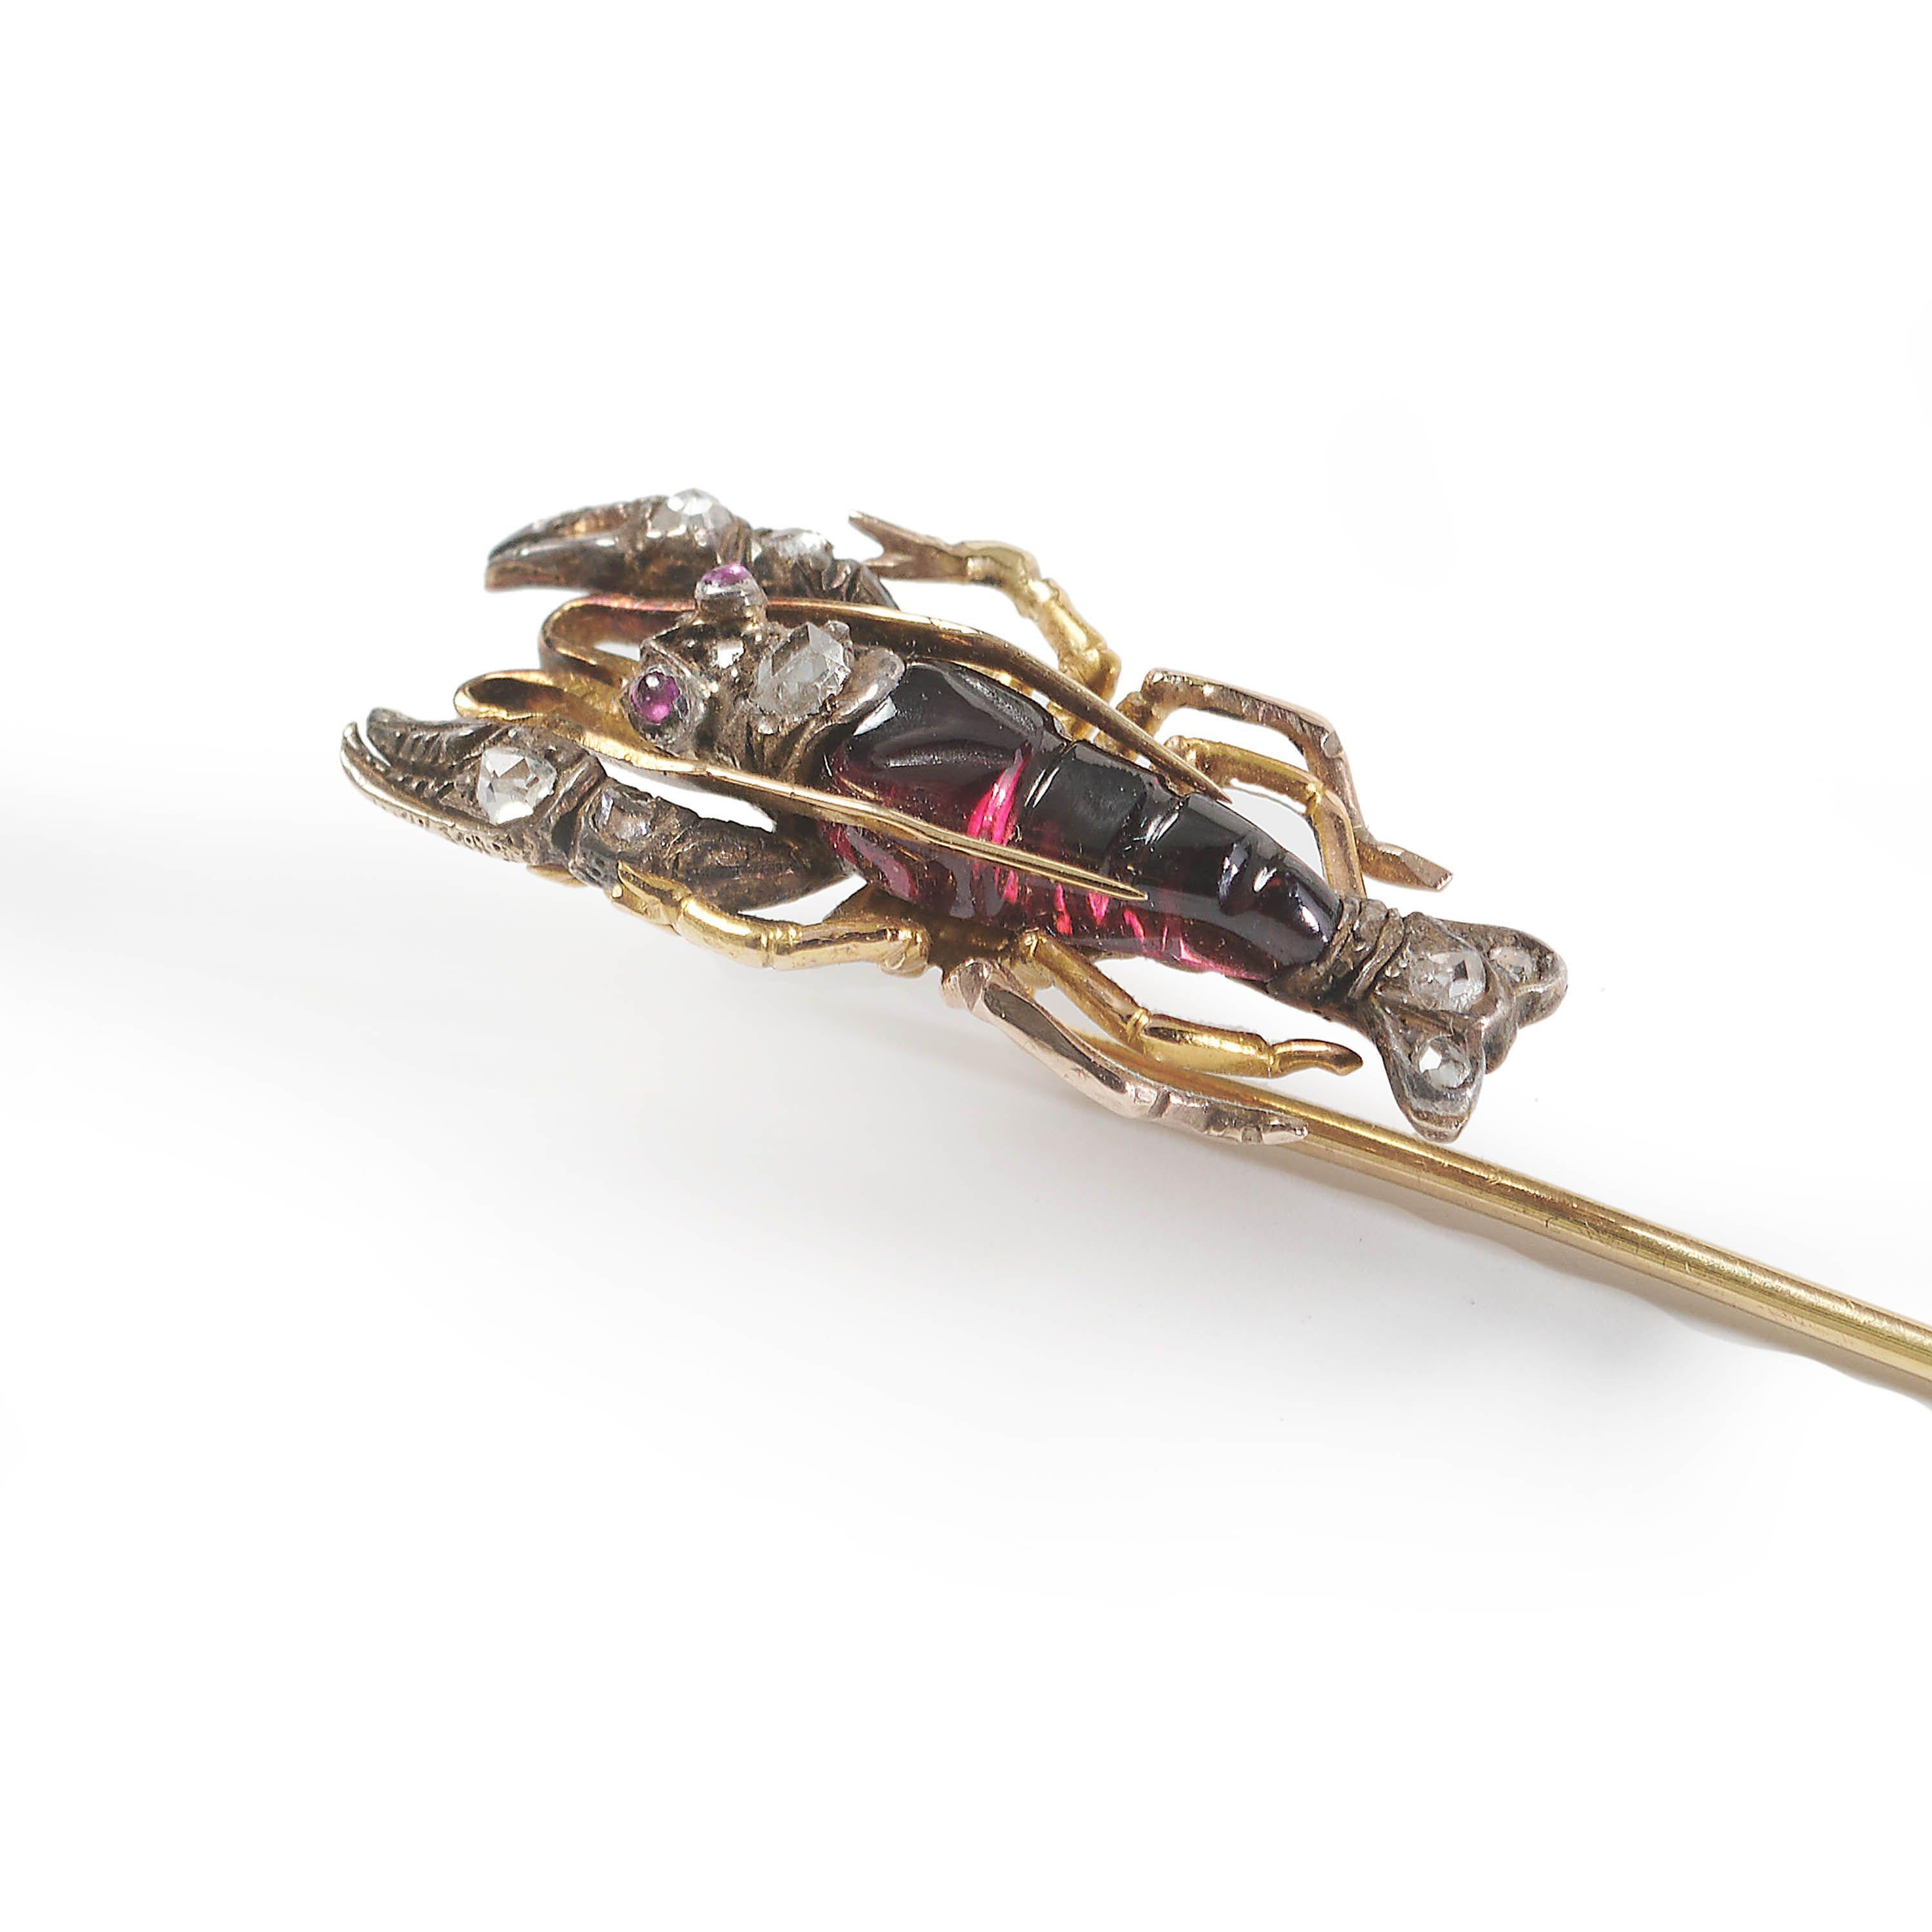 A Victorian lobster tie pin, hat pin or stick pin, with the body of the lobster carved from a single piece of garnet, with rose-cut diamonds set in the claws head and tail fins, with cabochon ruby set eyes, in silver grain settings, mounted in gold,